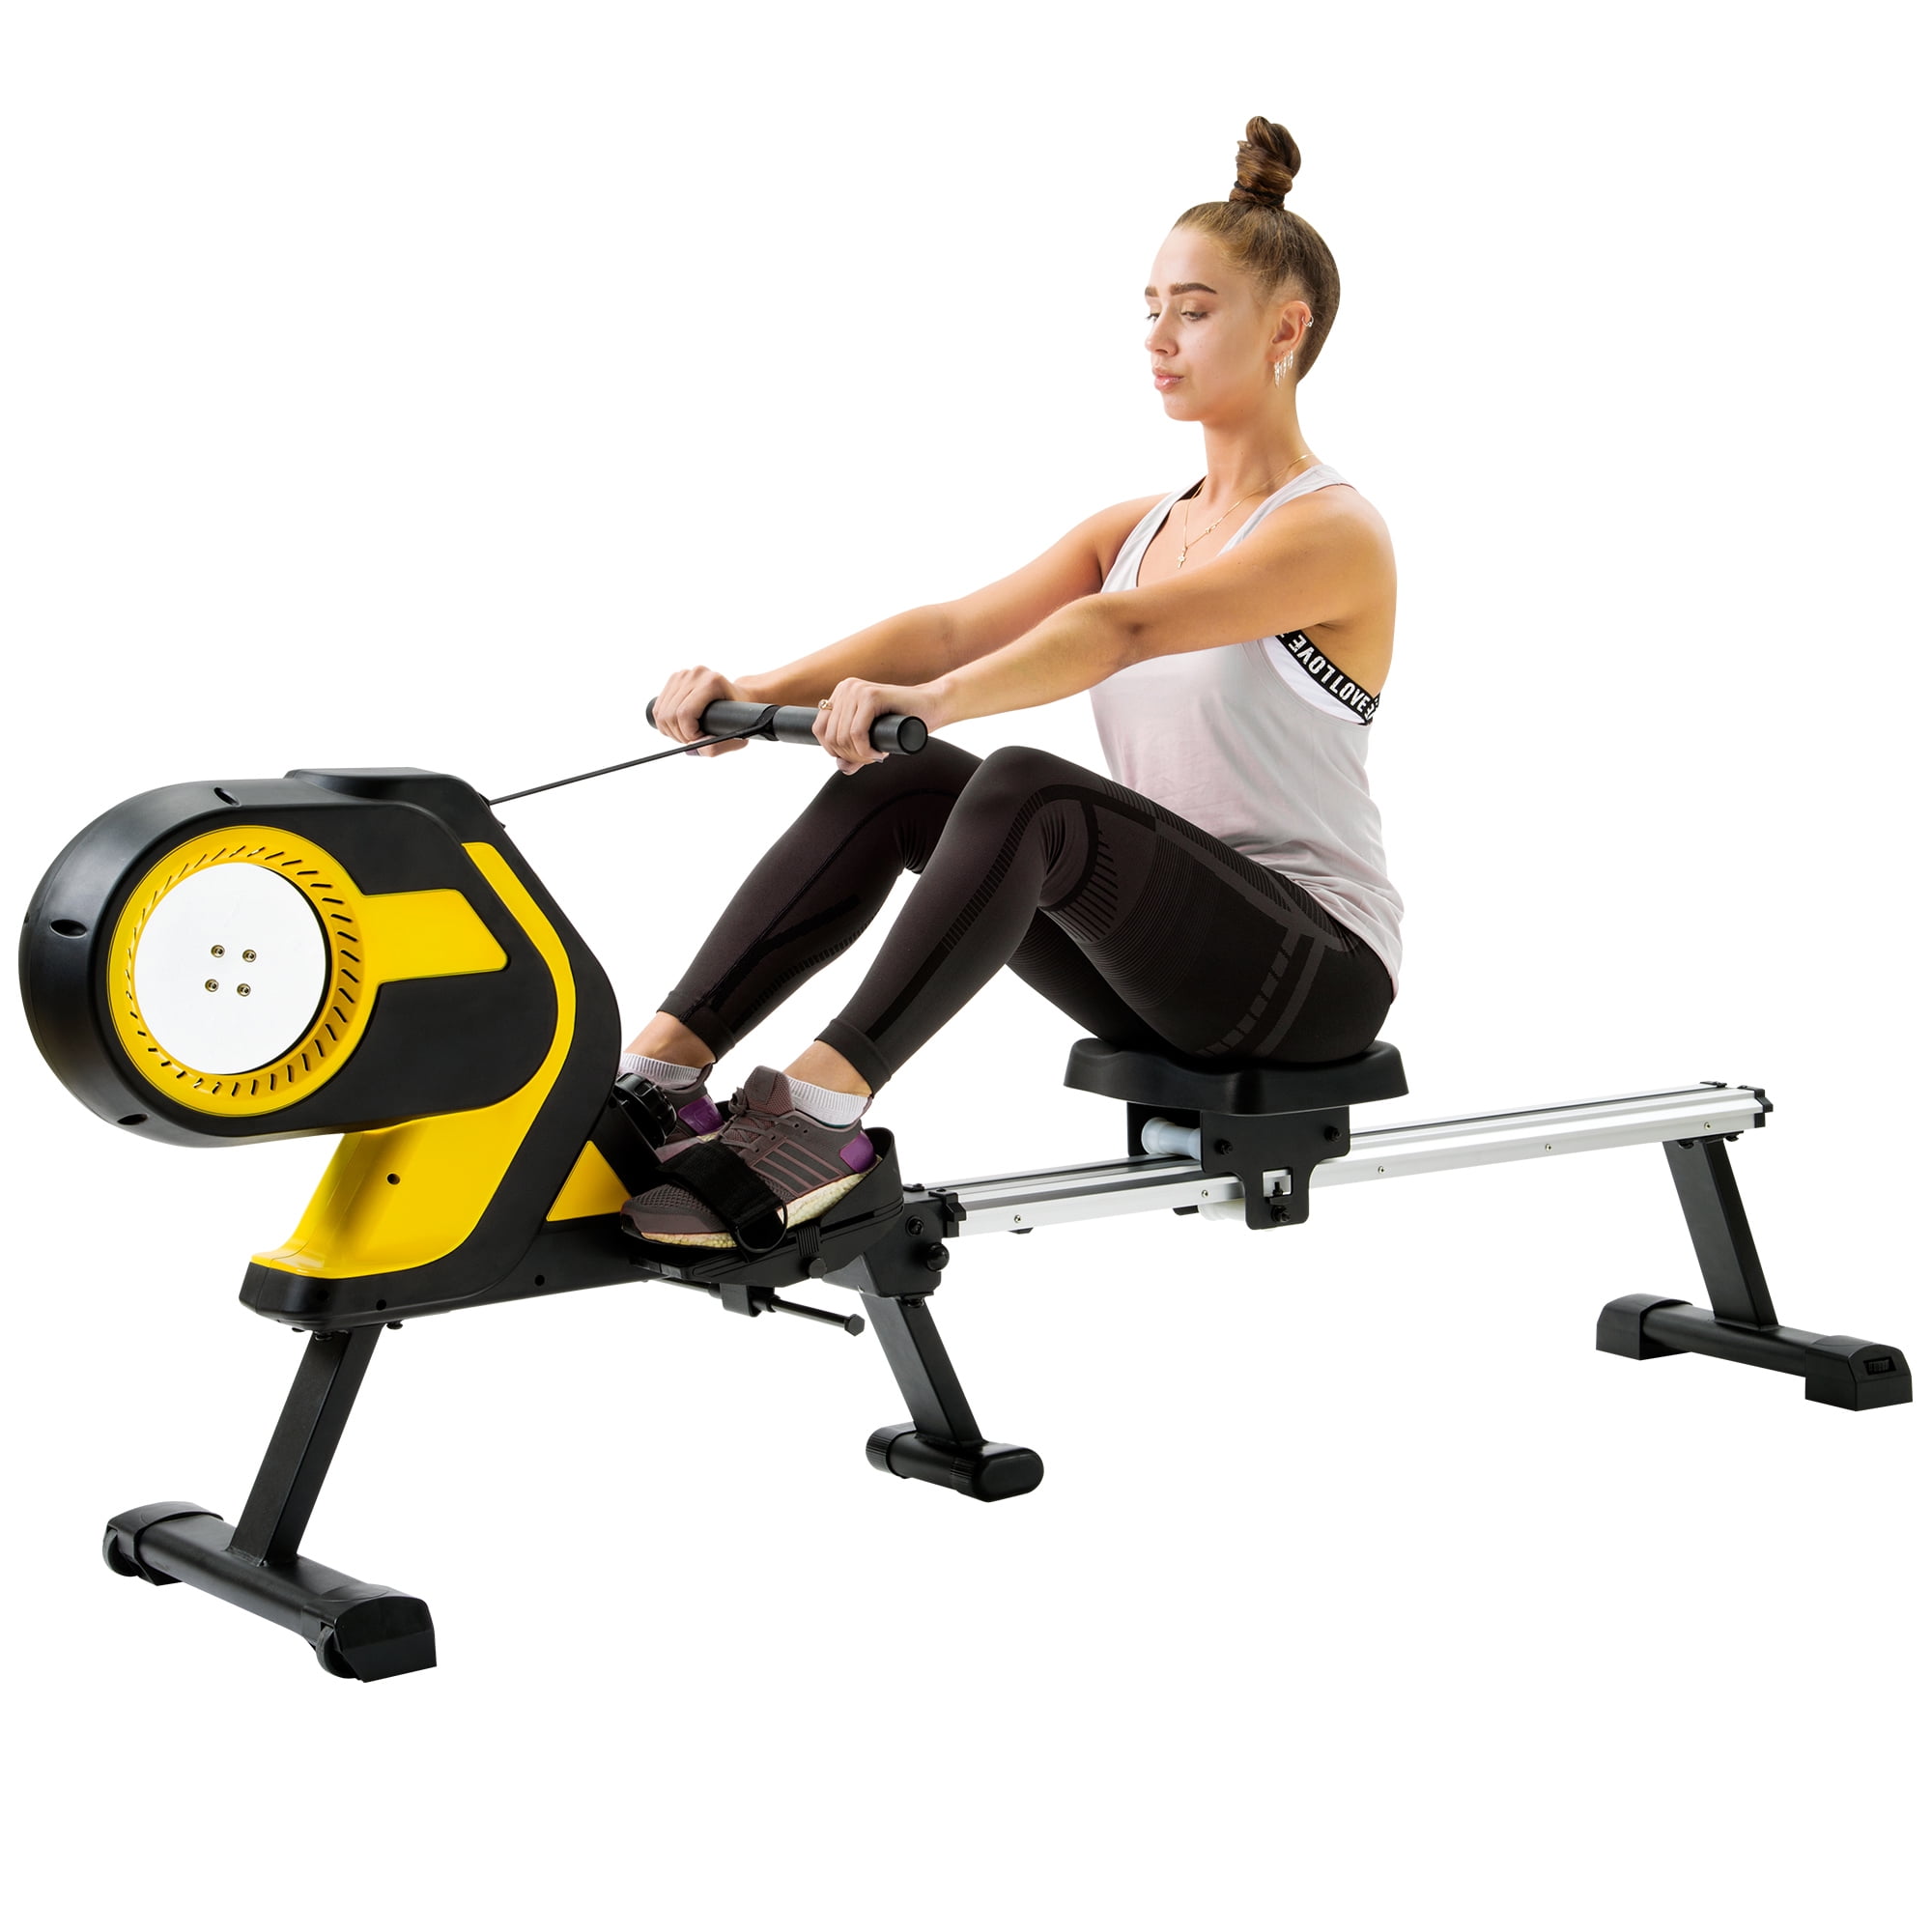 Folding Rowing Machine for Home Non-slip Grip 142 x 37.5 x 14 cm Sporting Rowing Machine with Display Cikonielf Professional Fitness Rowing Machine Ergonomic Cushion Non-slip Pedal 